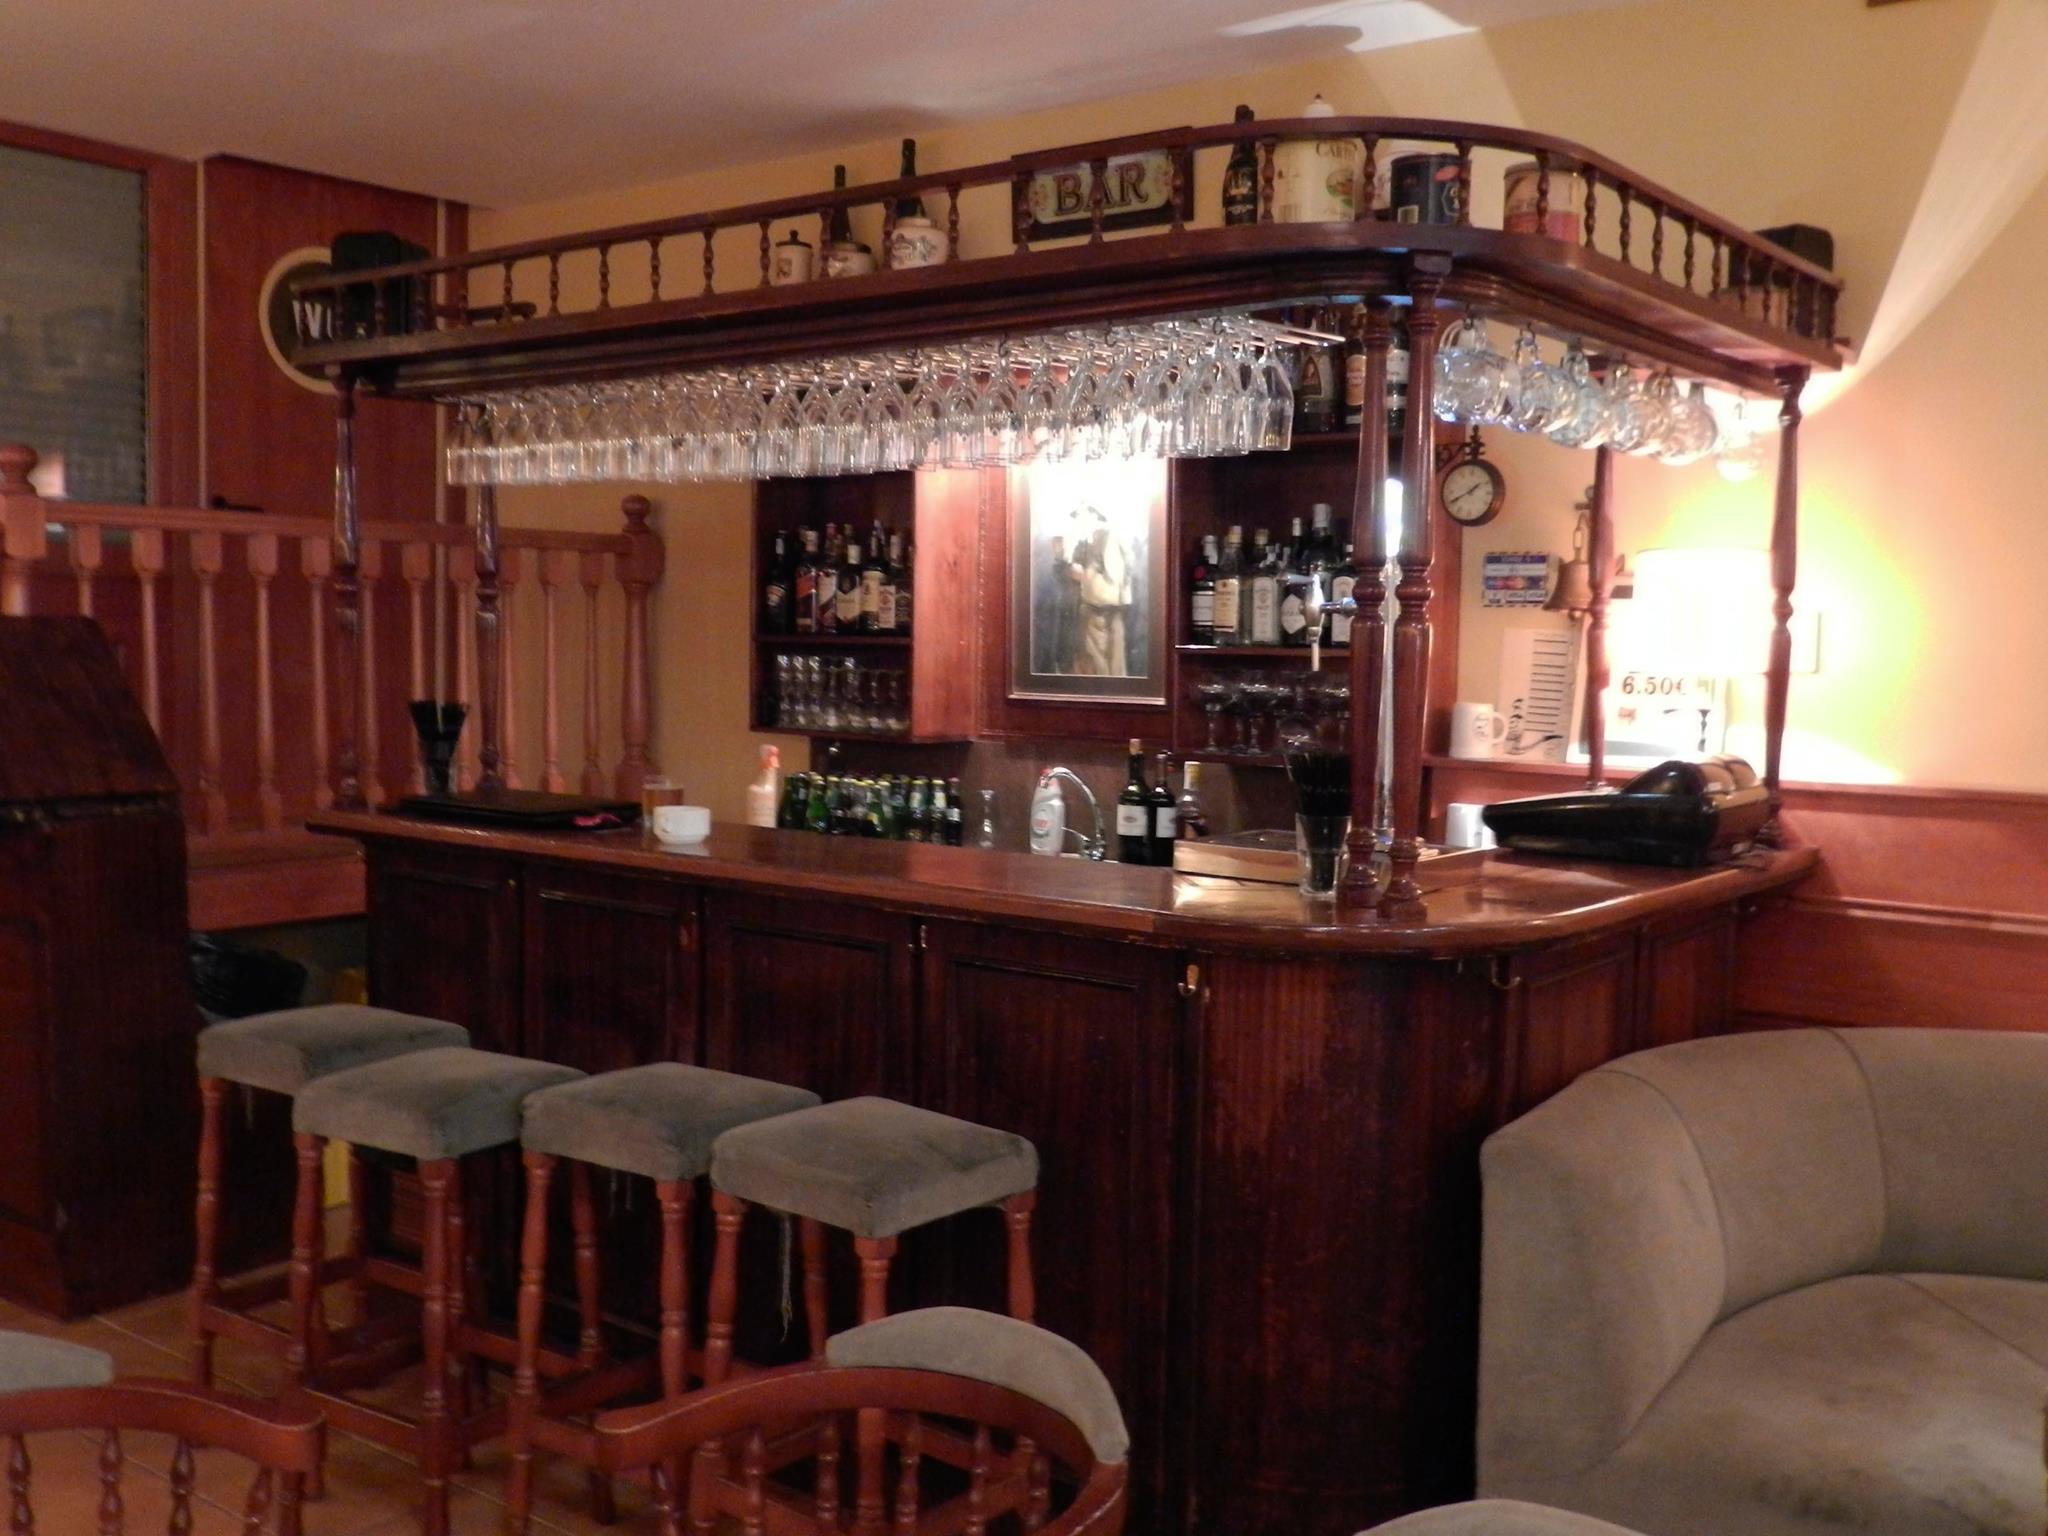 Top Theme Pubs in Barcelona Barcelona-Home